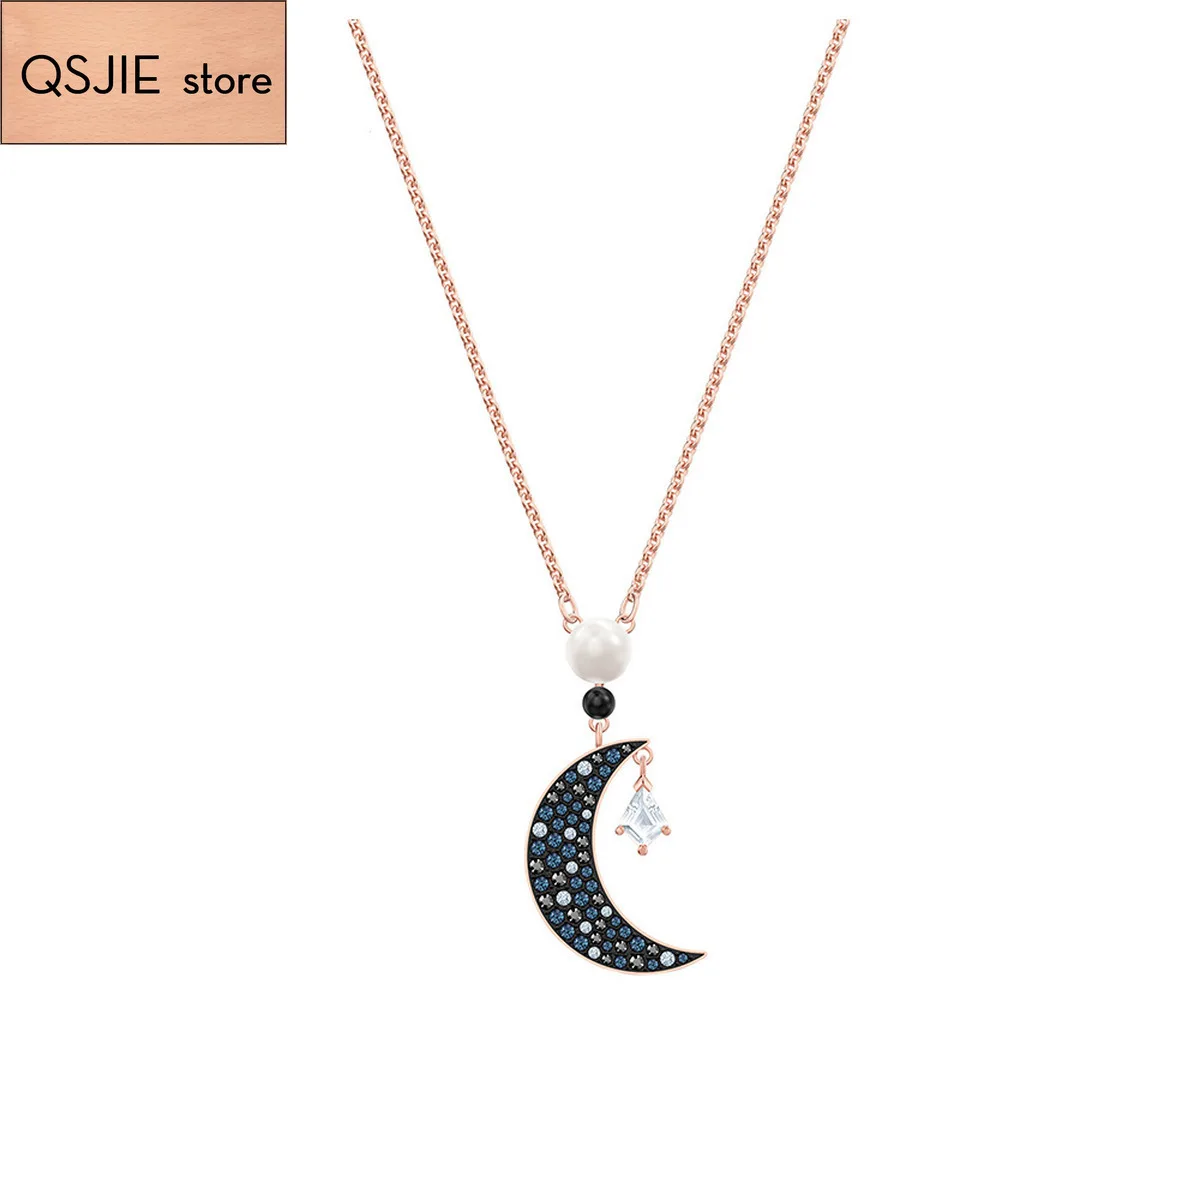 

QSJIE High quality 1:1 Swa Star Moon Golden Pendant with black lady Necklace Glamorous fashion jewelry